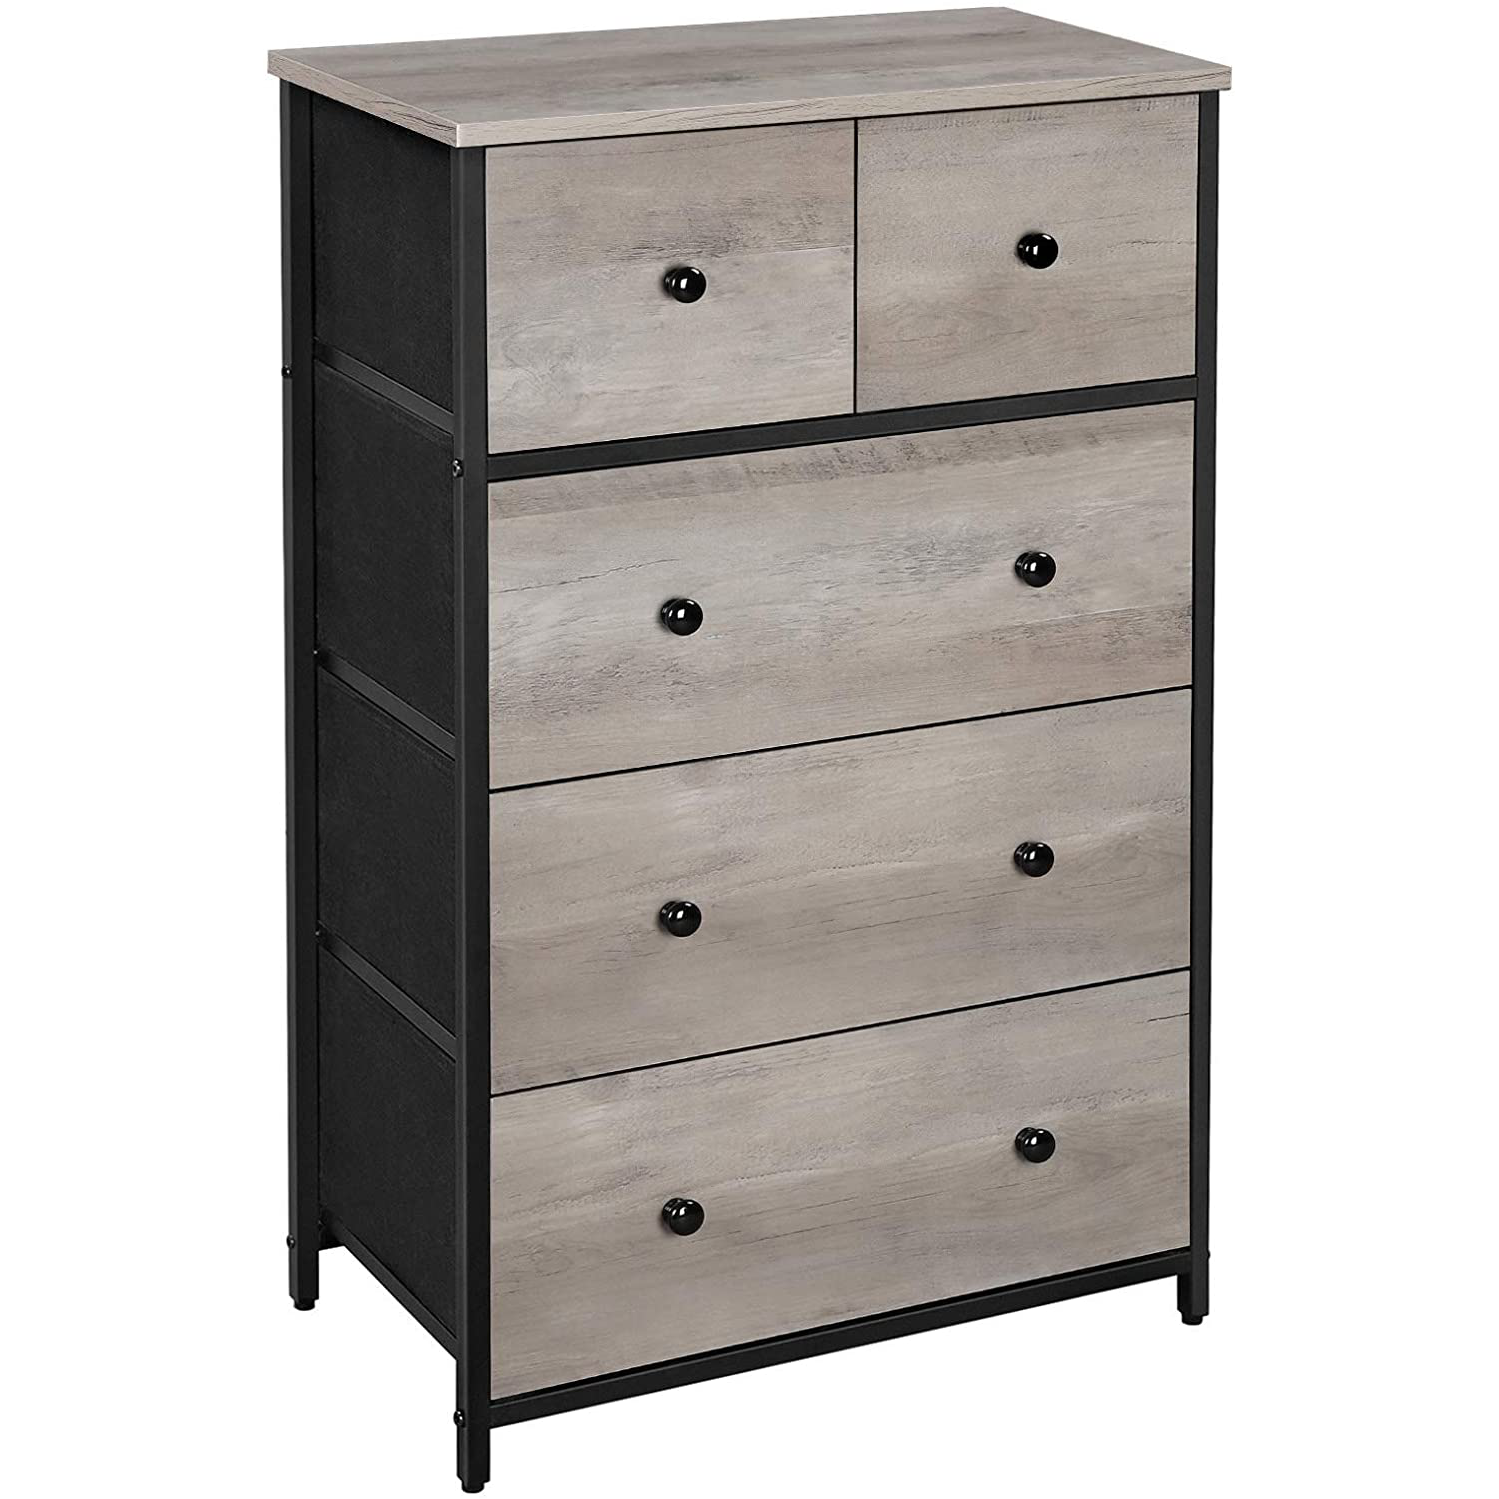 Rustic Storage Dresser Tower with 5 Fabric Drawers